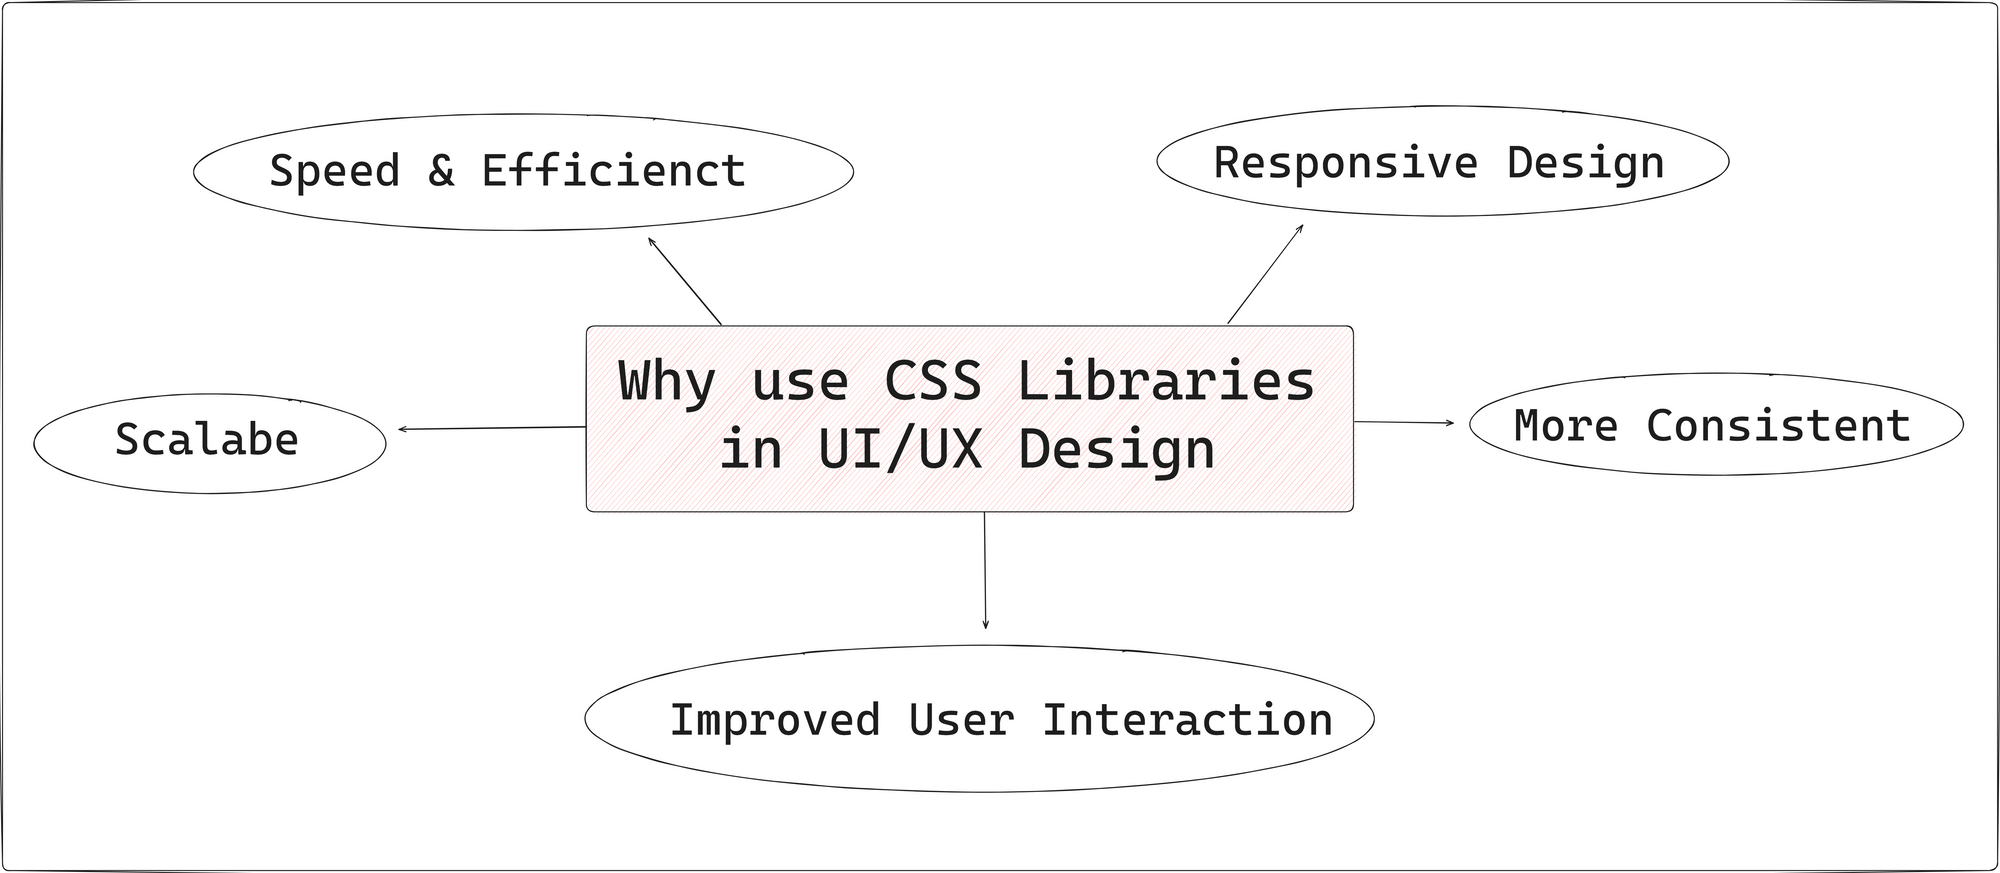 Why use CSS Libraries in UI/UX Design